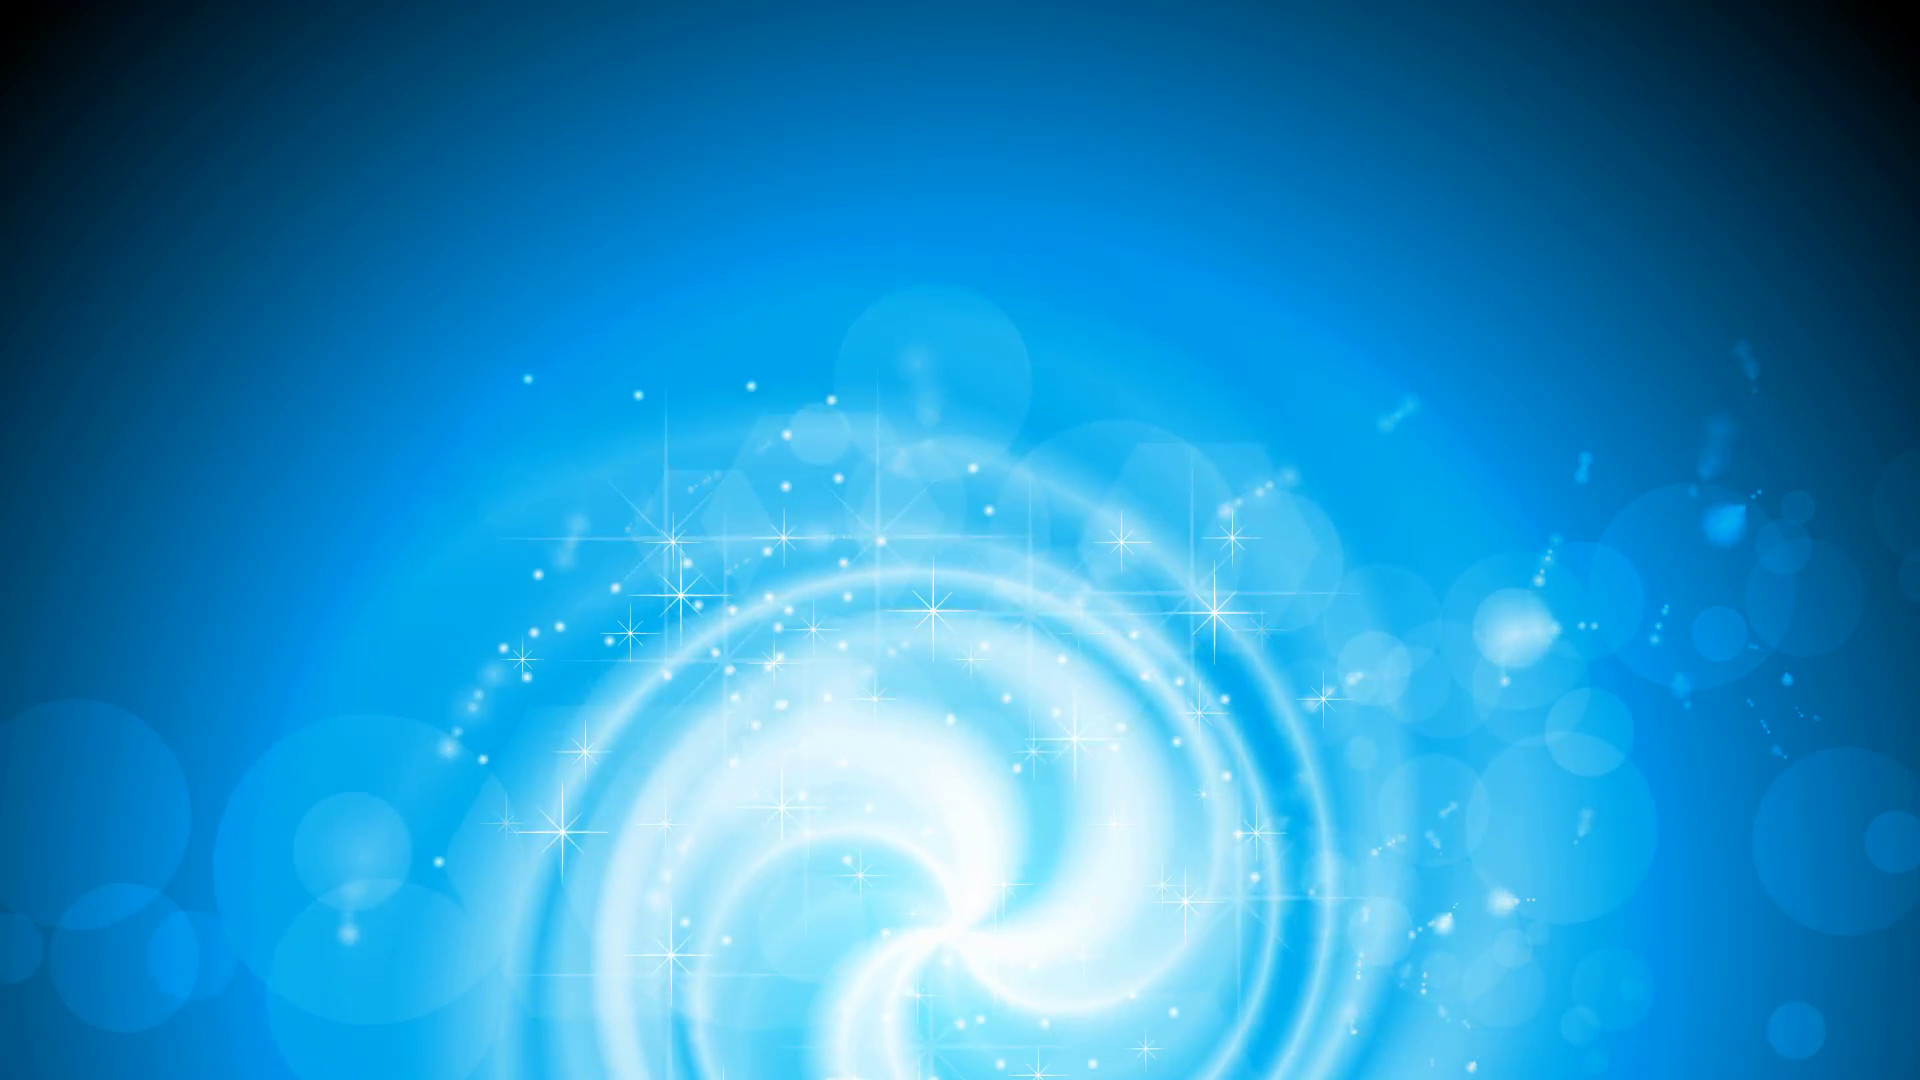 1920x1080 Shiny blue swirl background with sparks. Video animation HD   Motion Background - VideoBlocks